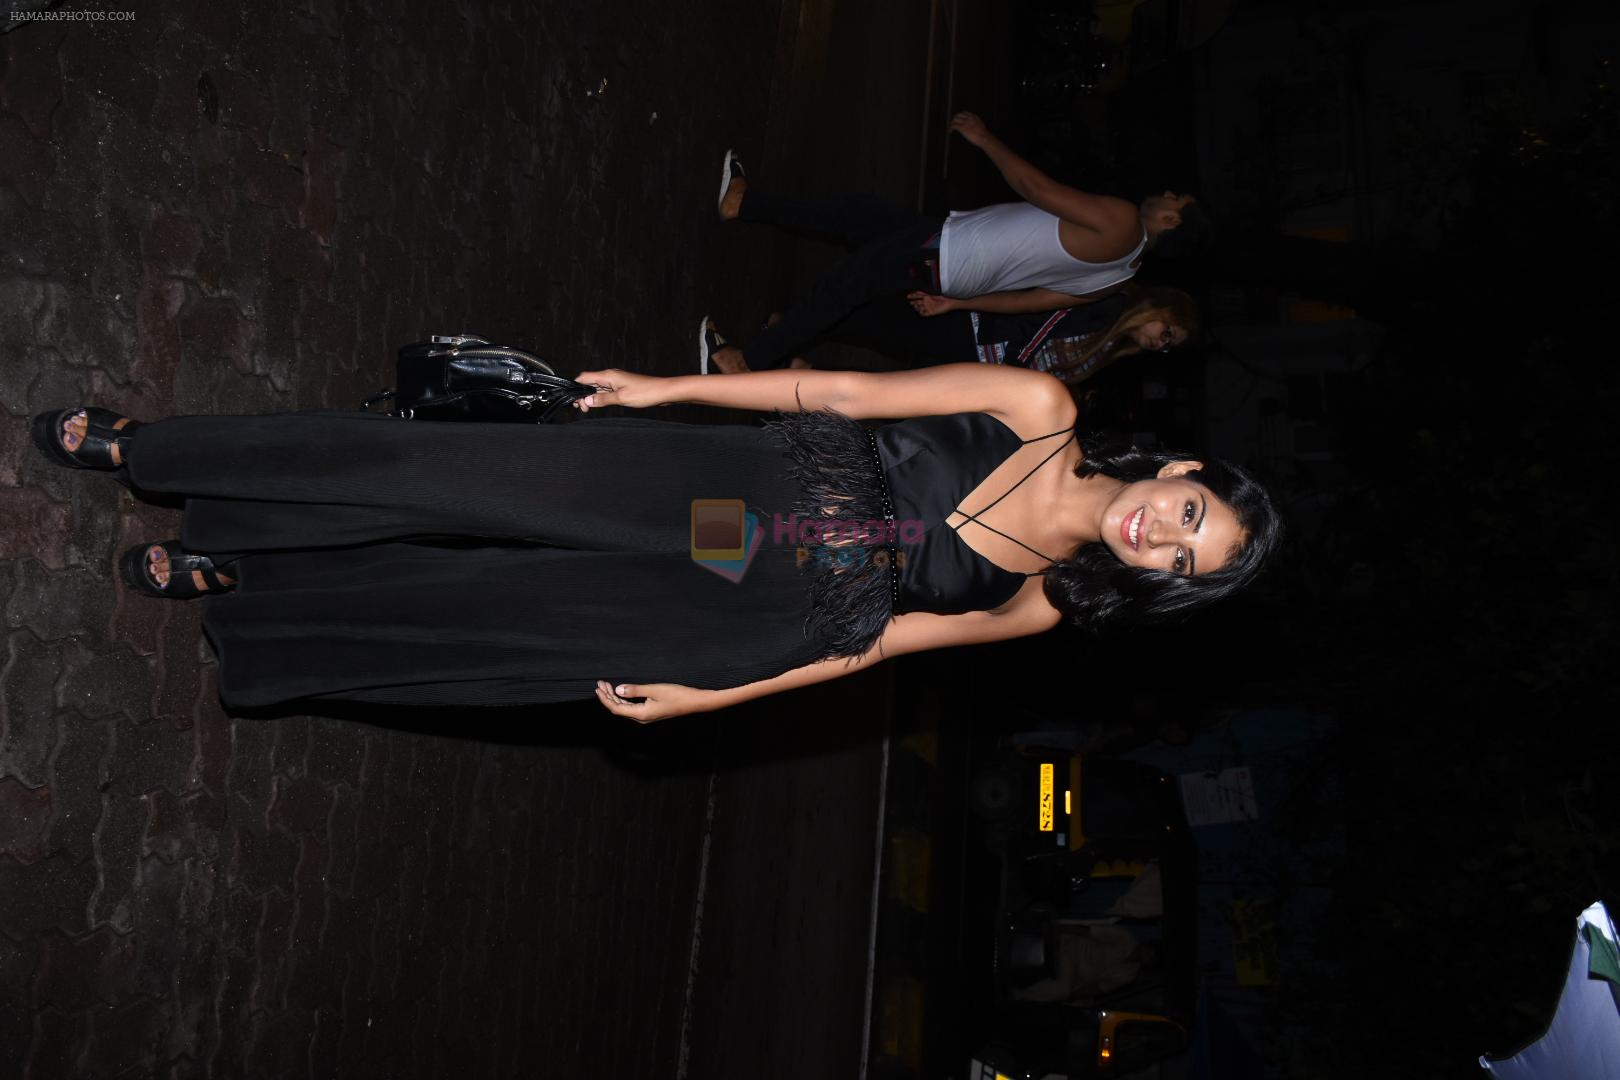 at the Success party of Kabir Singh in Arth, khar on 4th July 2019